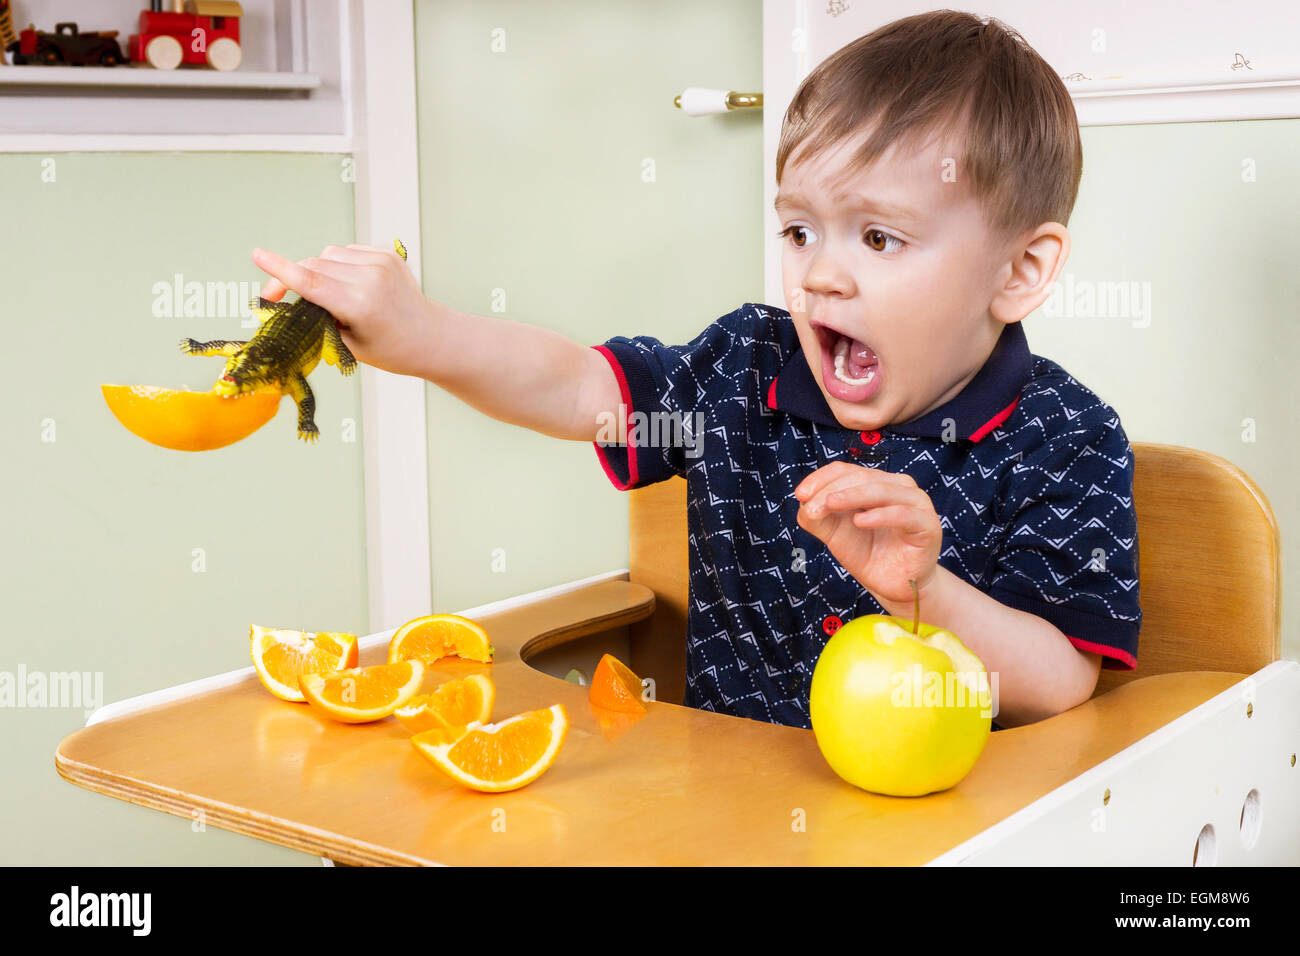 Small boy playing around with fruit and acting silly Stock Photo